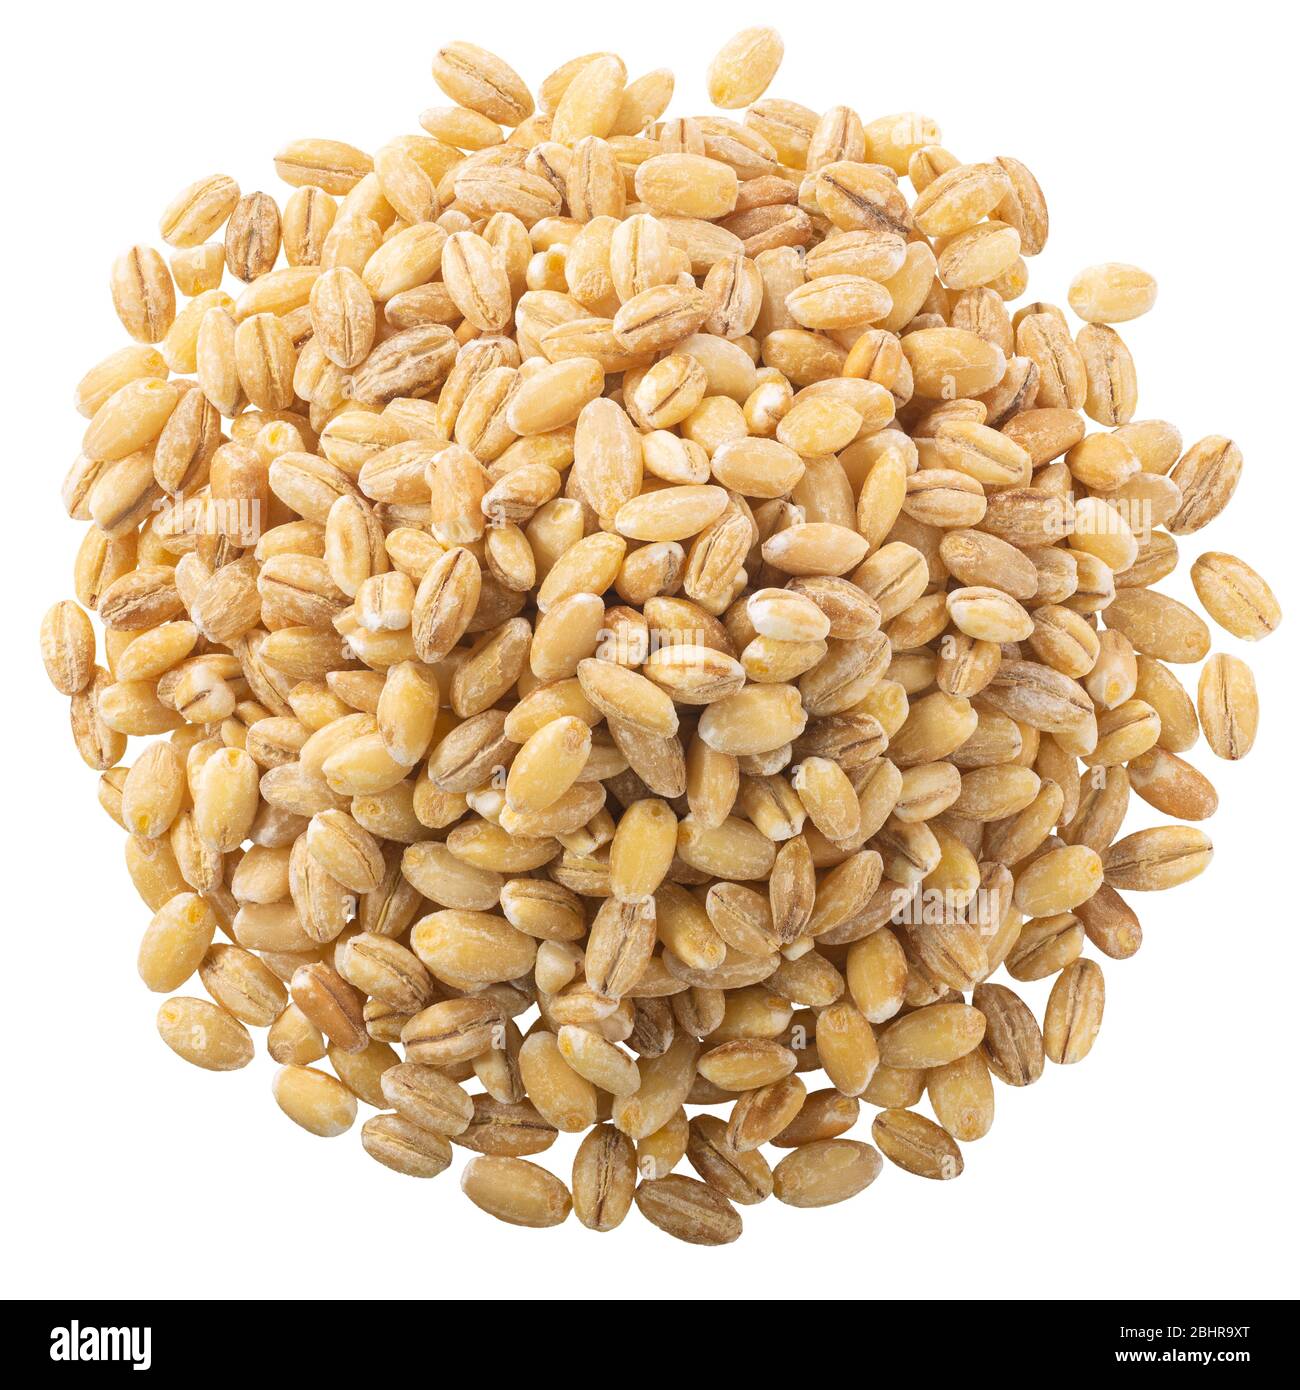 Pile of uncooked pearl barley, a wholegrain cereal, isolated, top view Stock Photo